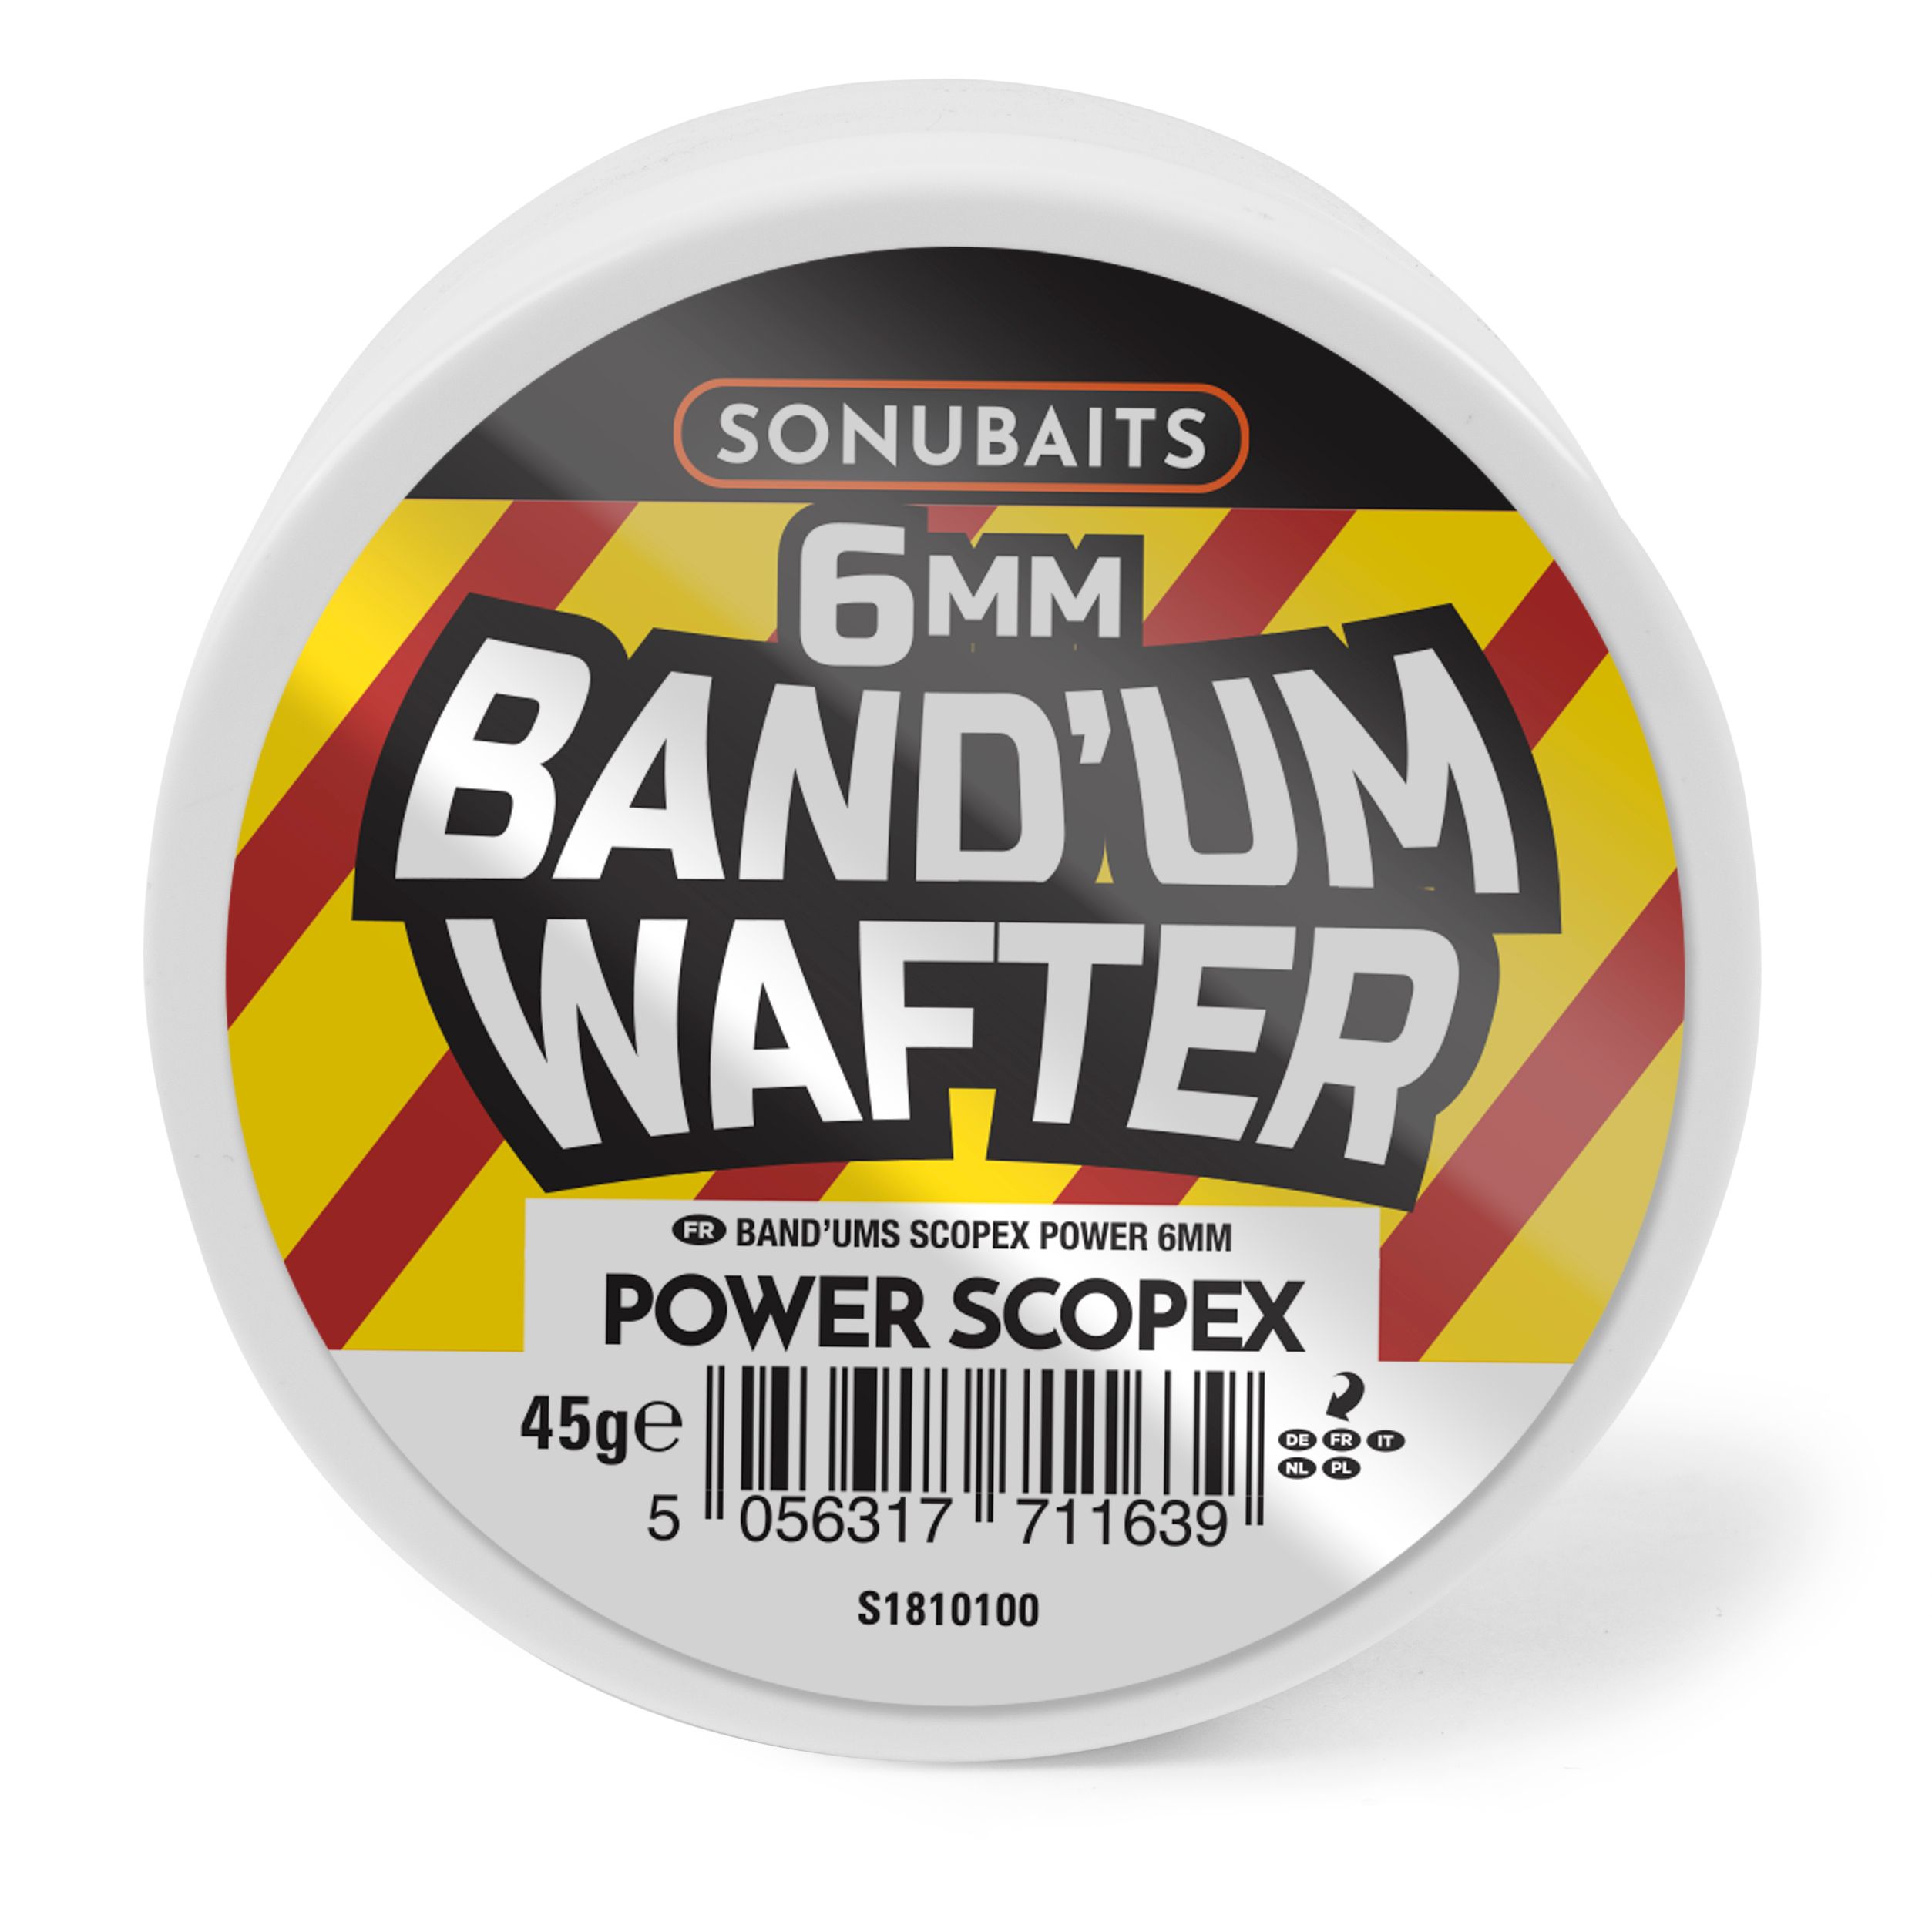 Sonubaits Band'um Wafters 6mm - Power Scopex